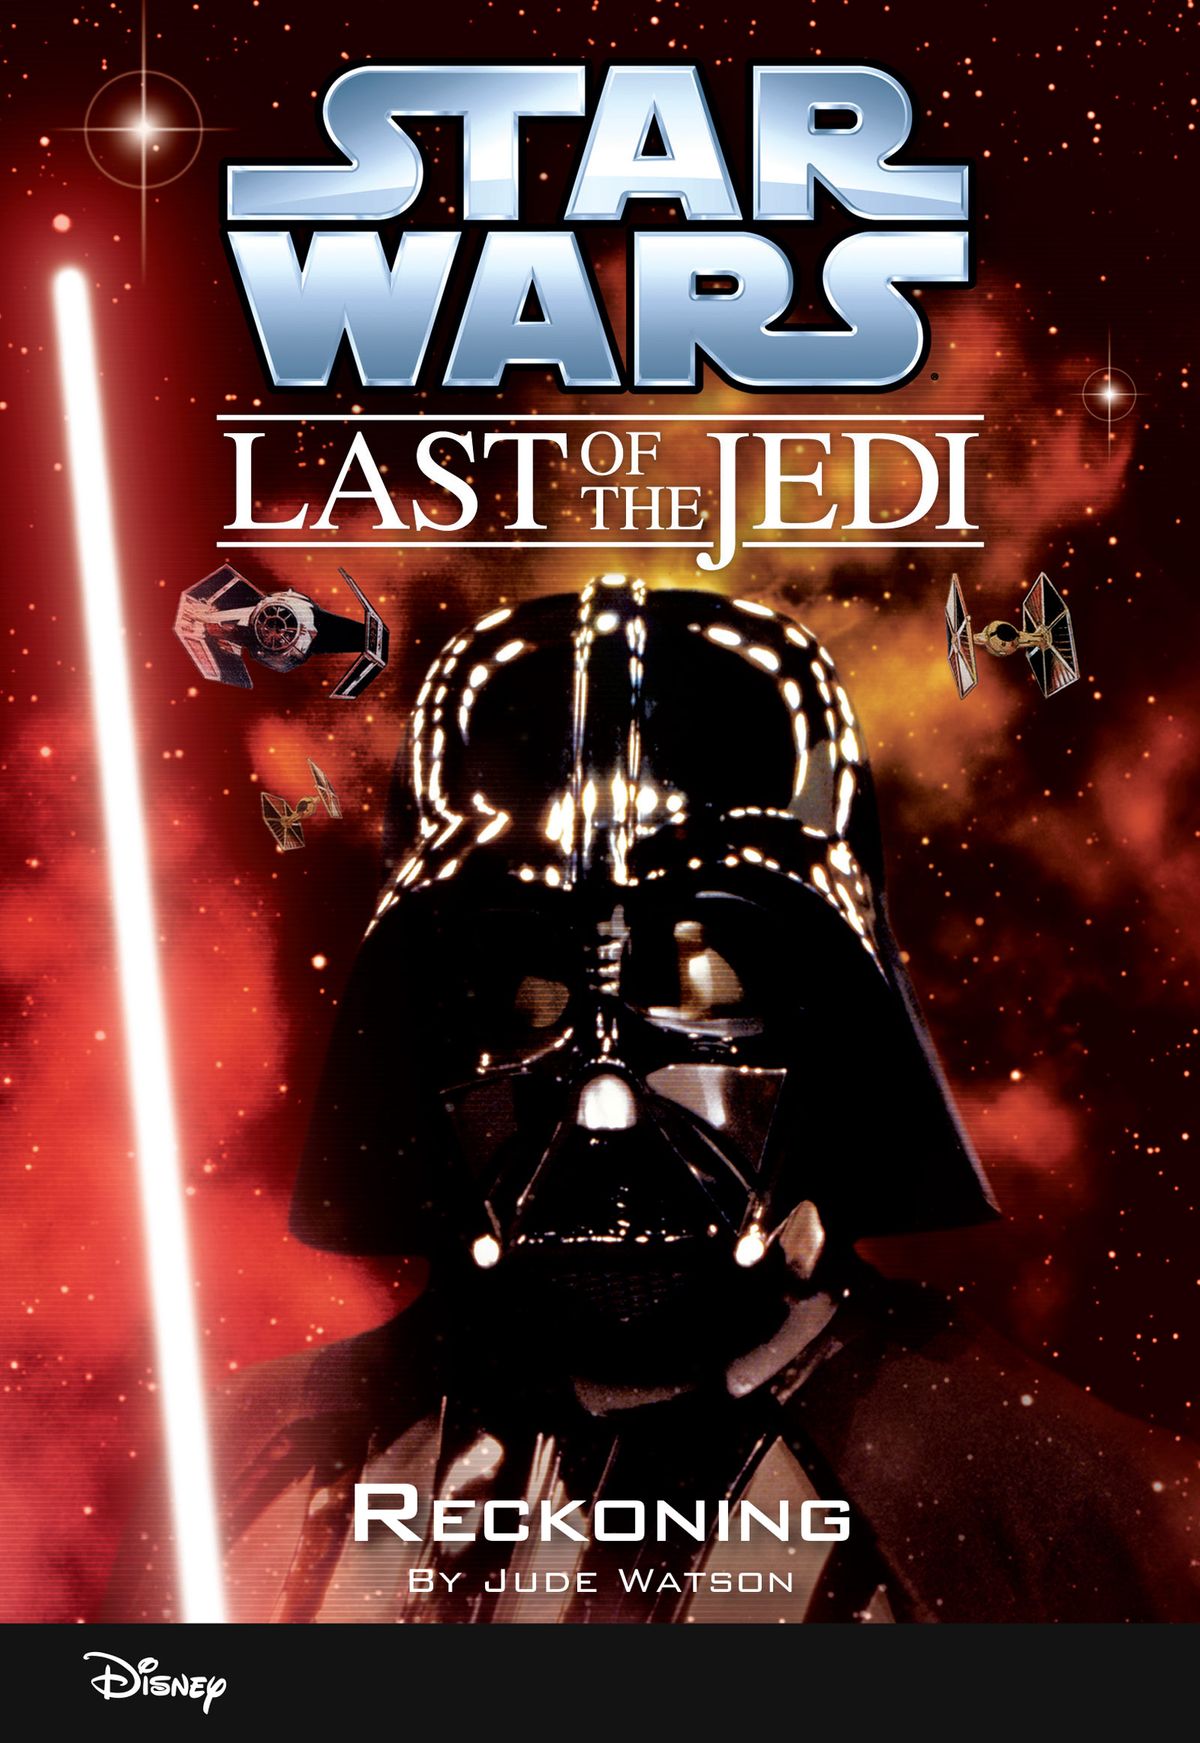 The Last of the Jedi: Reckoning